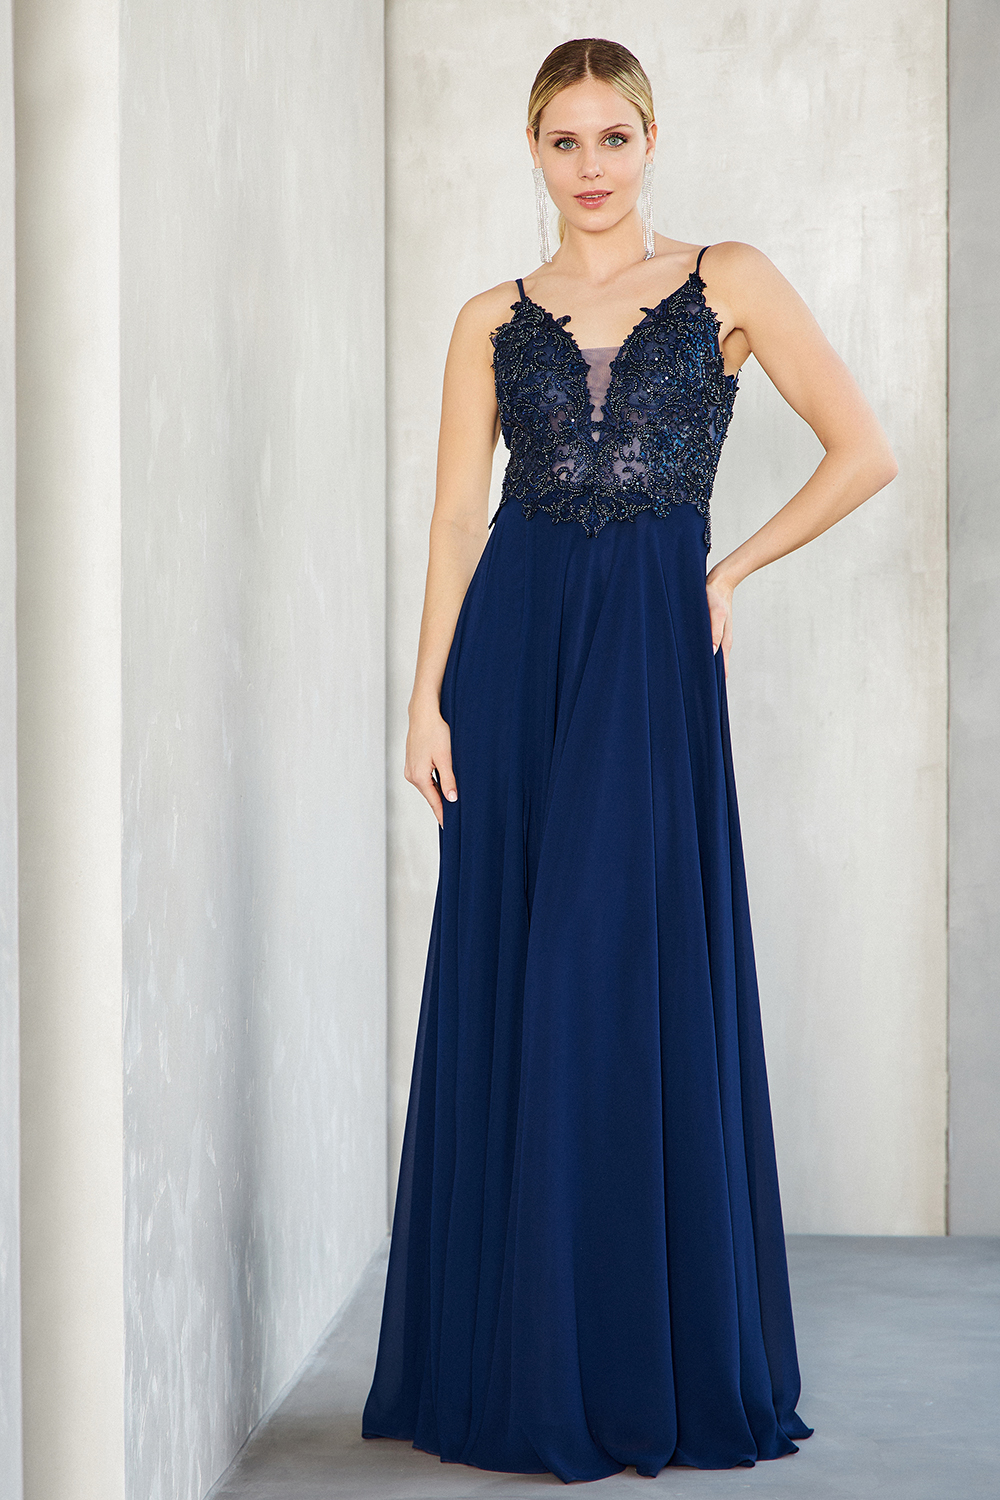 Evening Dresses / Long evening chiffon dress with beaded top, straps and open back